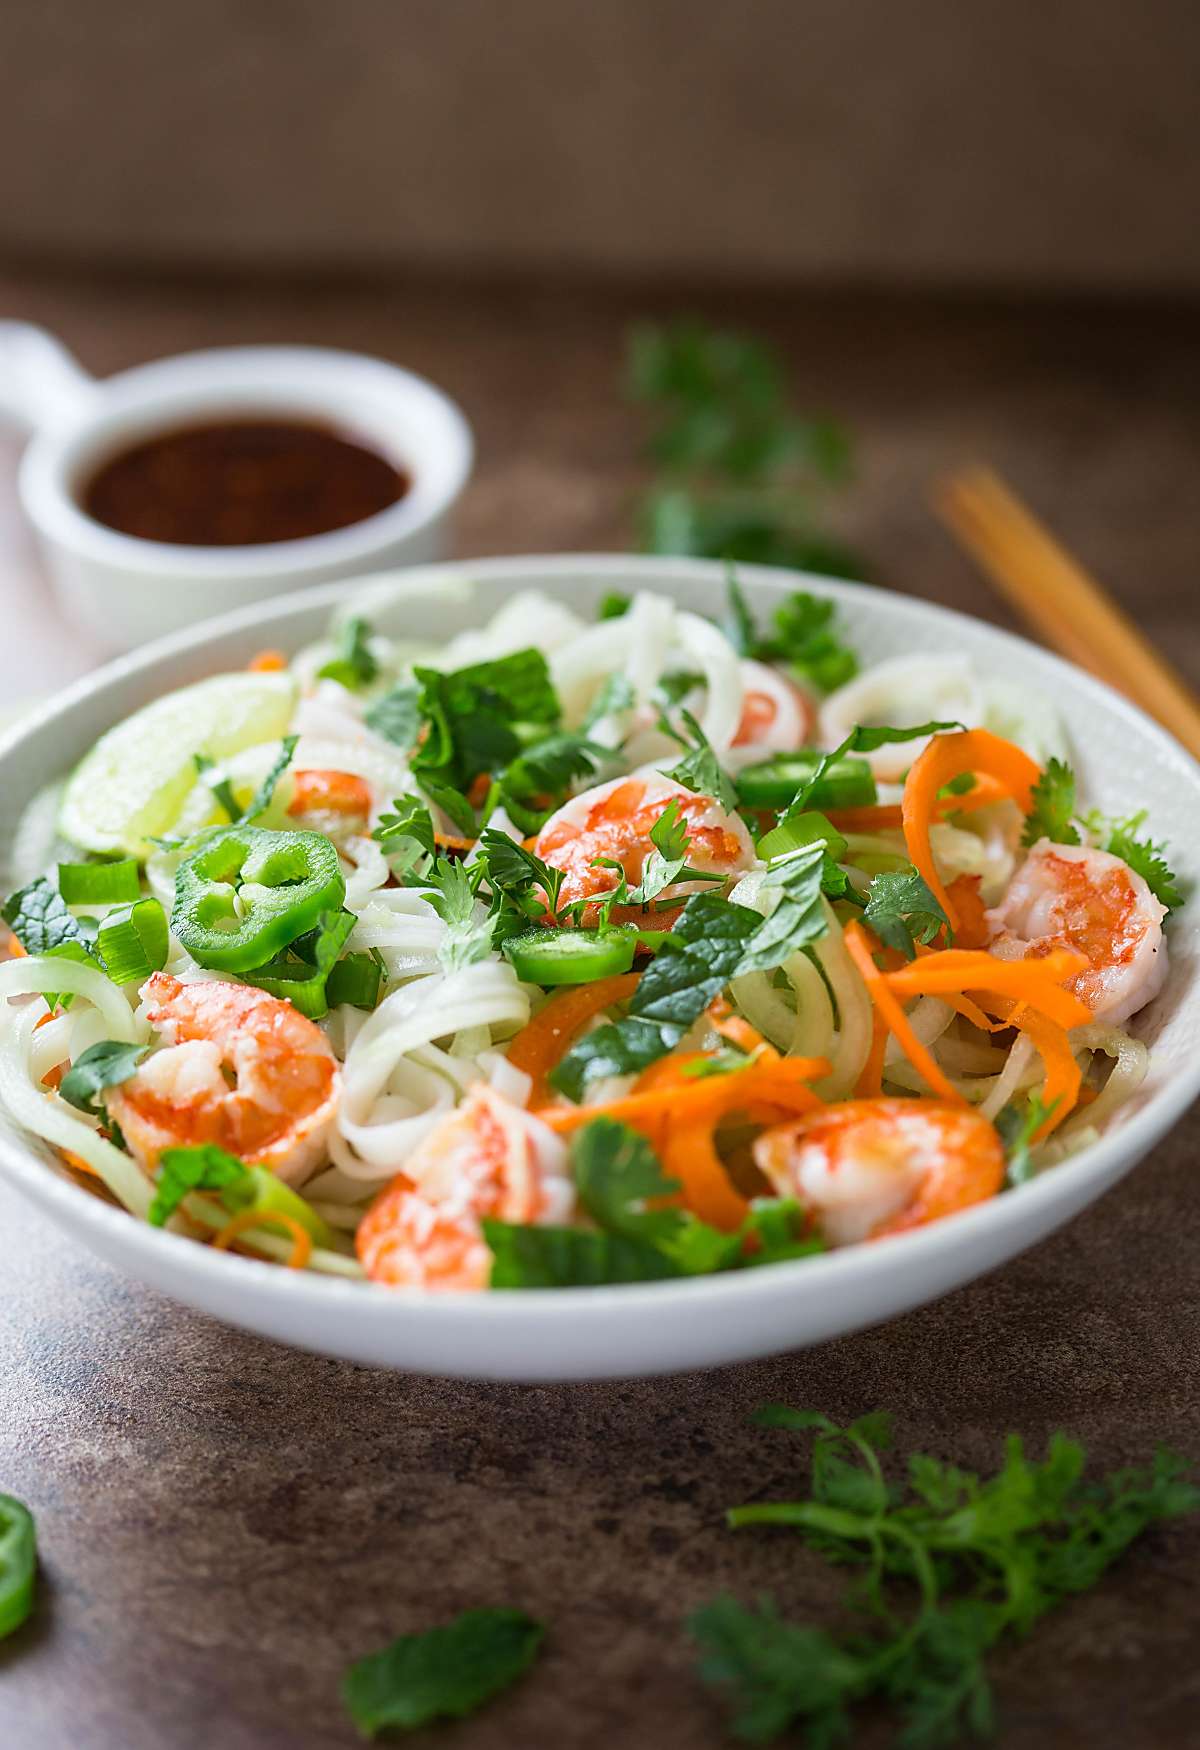 Vietnamese summer rolls salad with chili garlic and soy sauce dressing